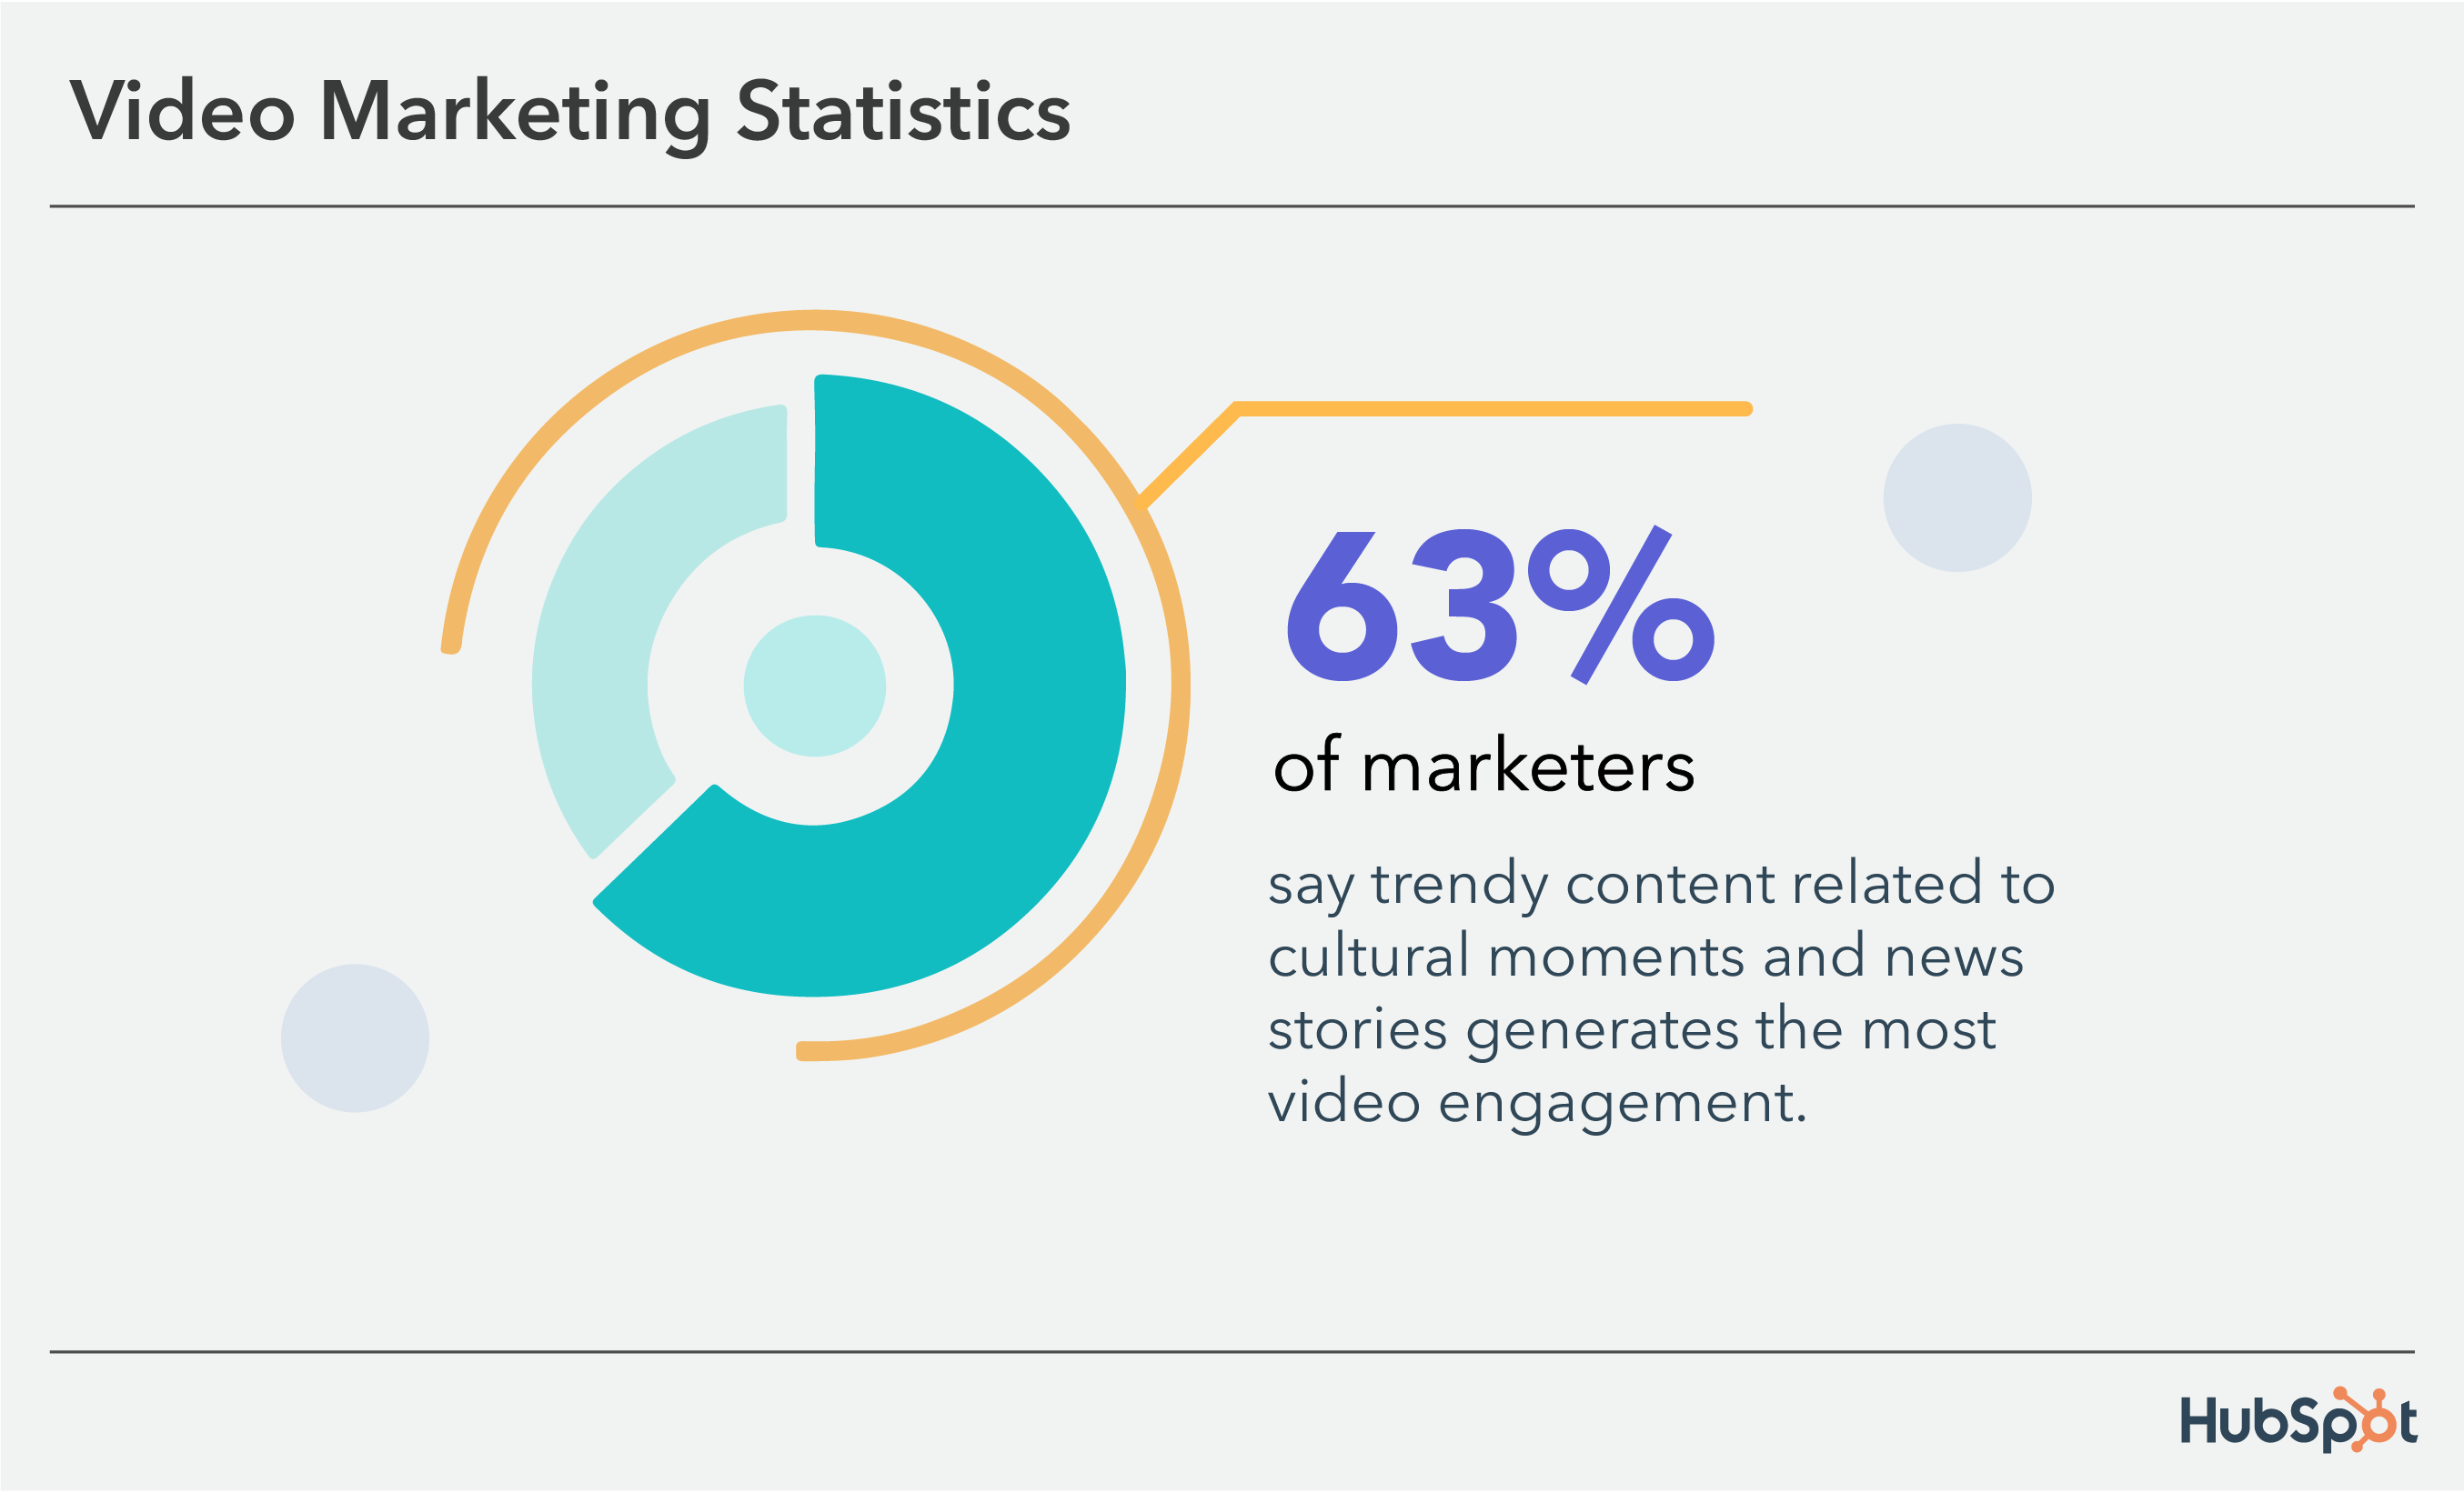 Video marketing statistics: 63% of marketers say that trendy content is most interesting for video